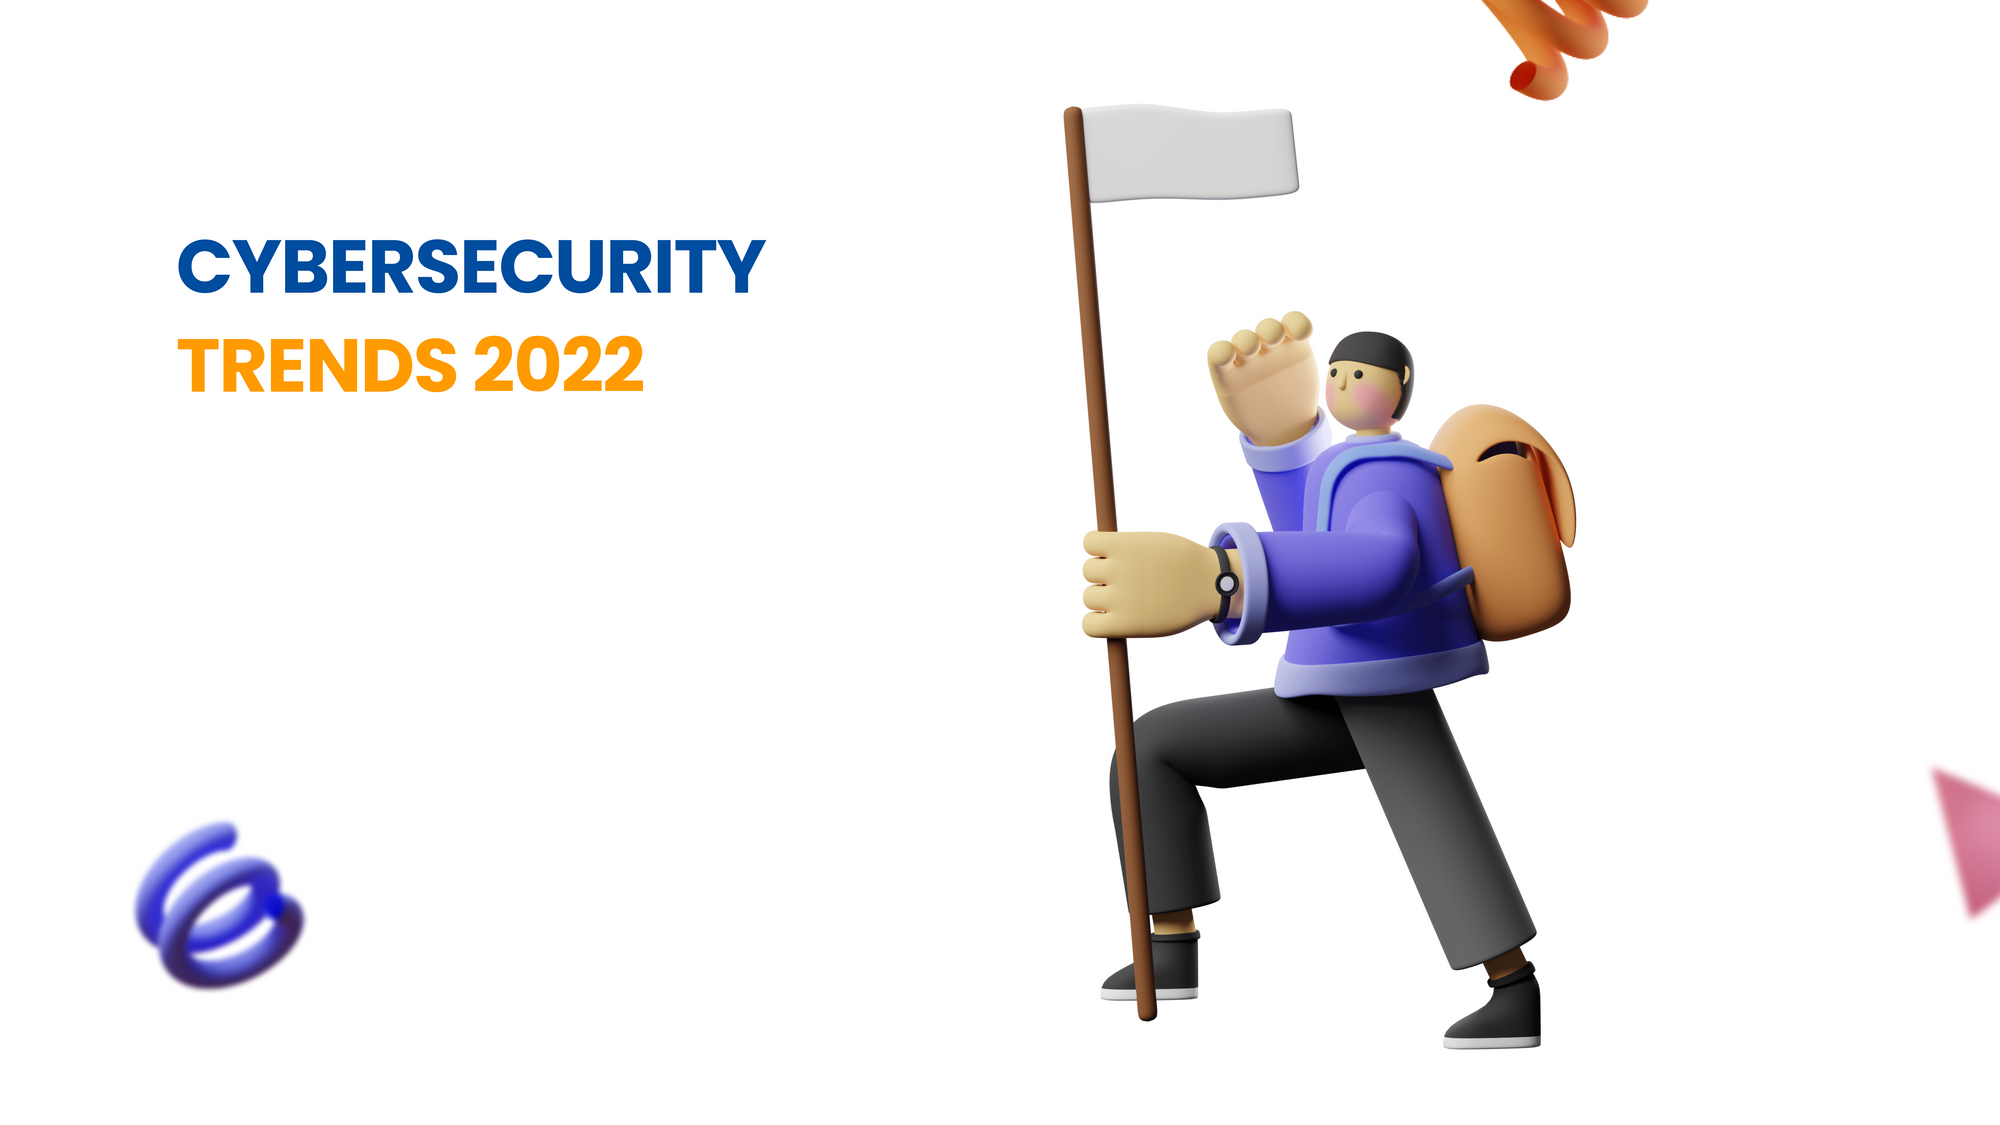 Cybersecurity trends 2022